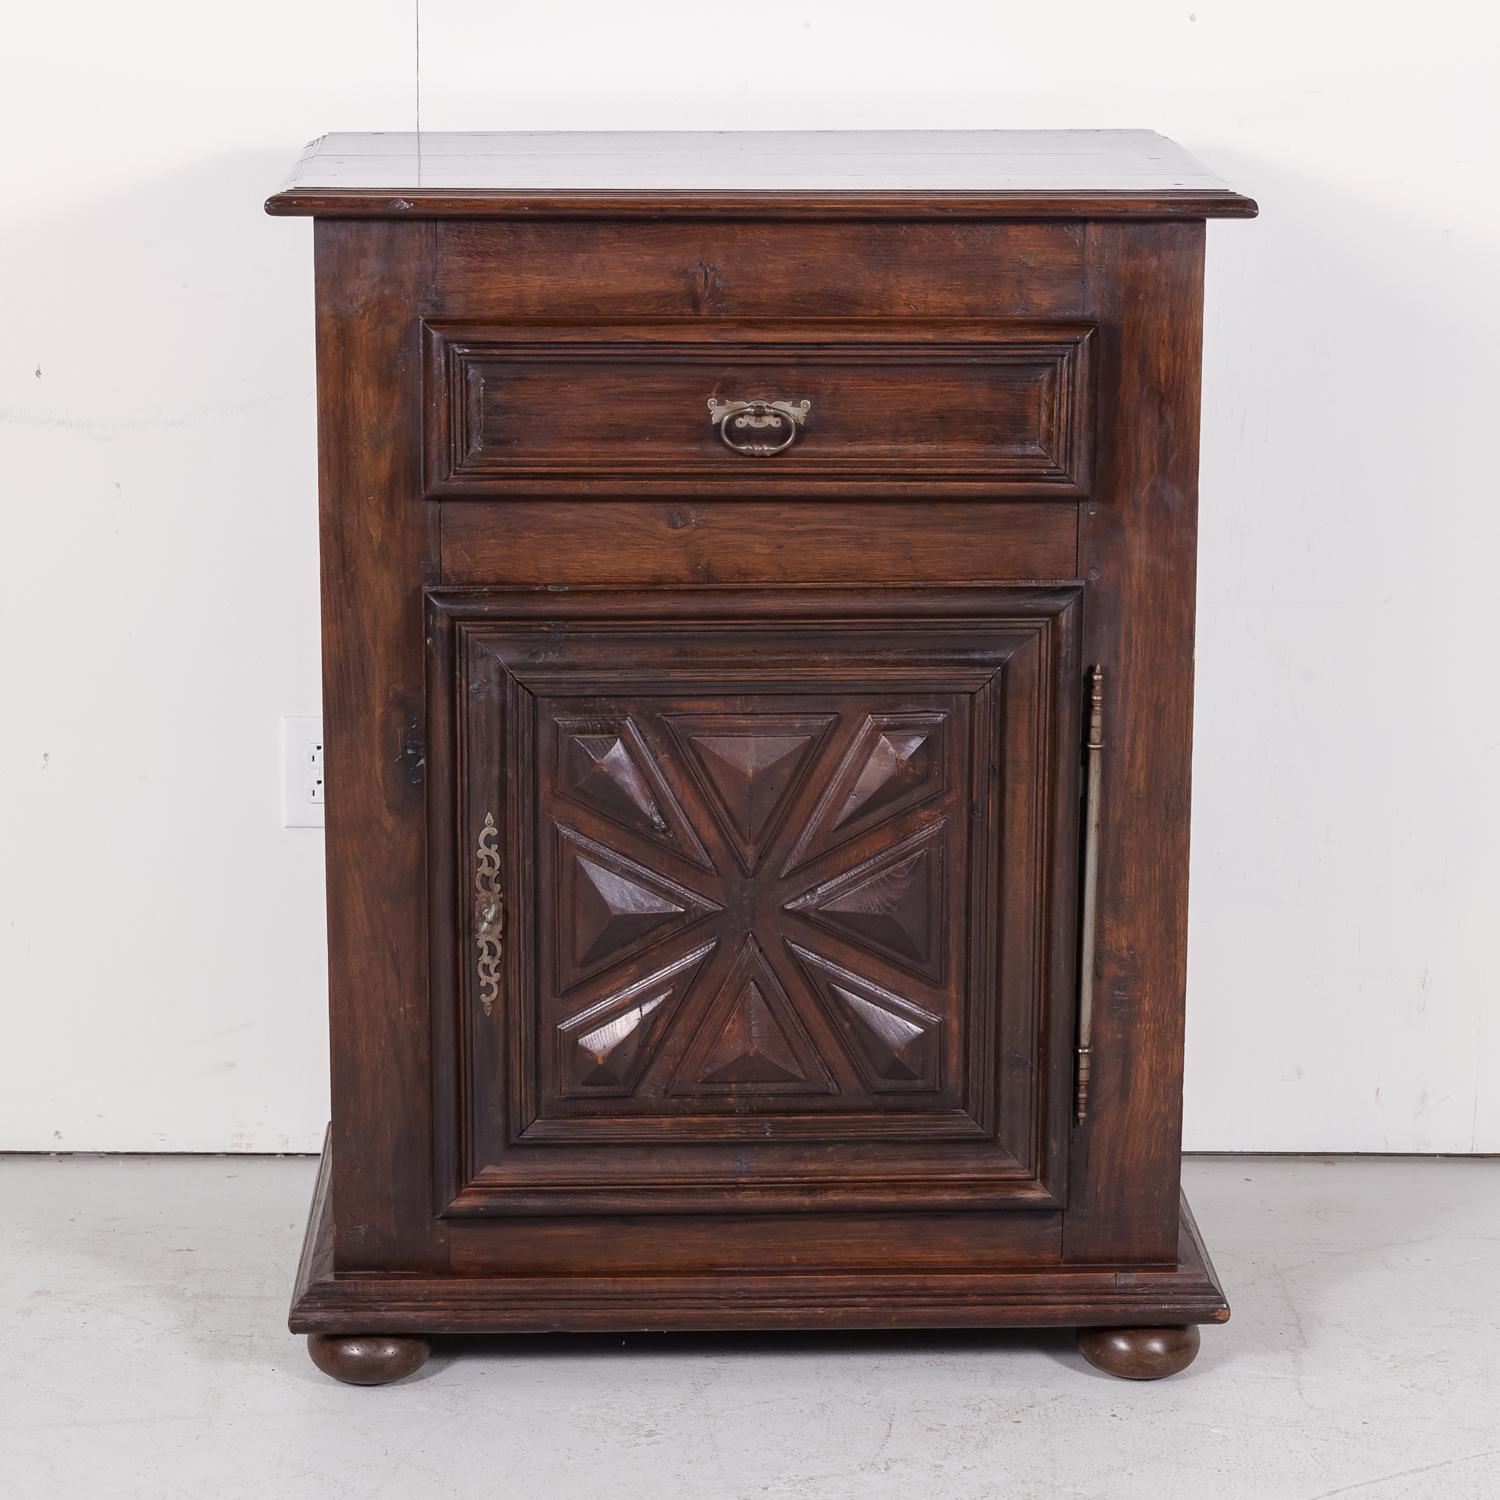 A tall early 19th century French Louis XIII style jam cabinet or confiturier from Normandy, circa 1820s. Handcrafted of old growth oak with a rectangular beveled edge top over a single full-width drawer defined by bold molding and having a raised